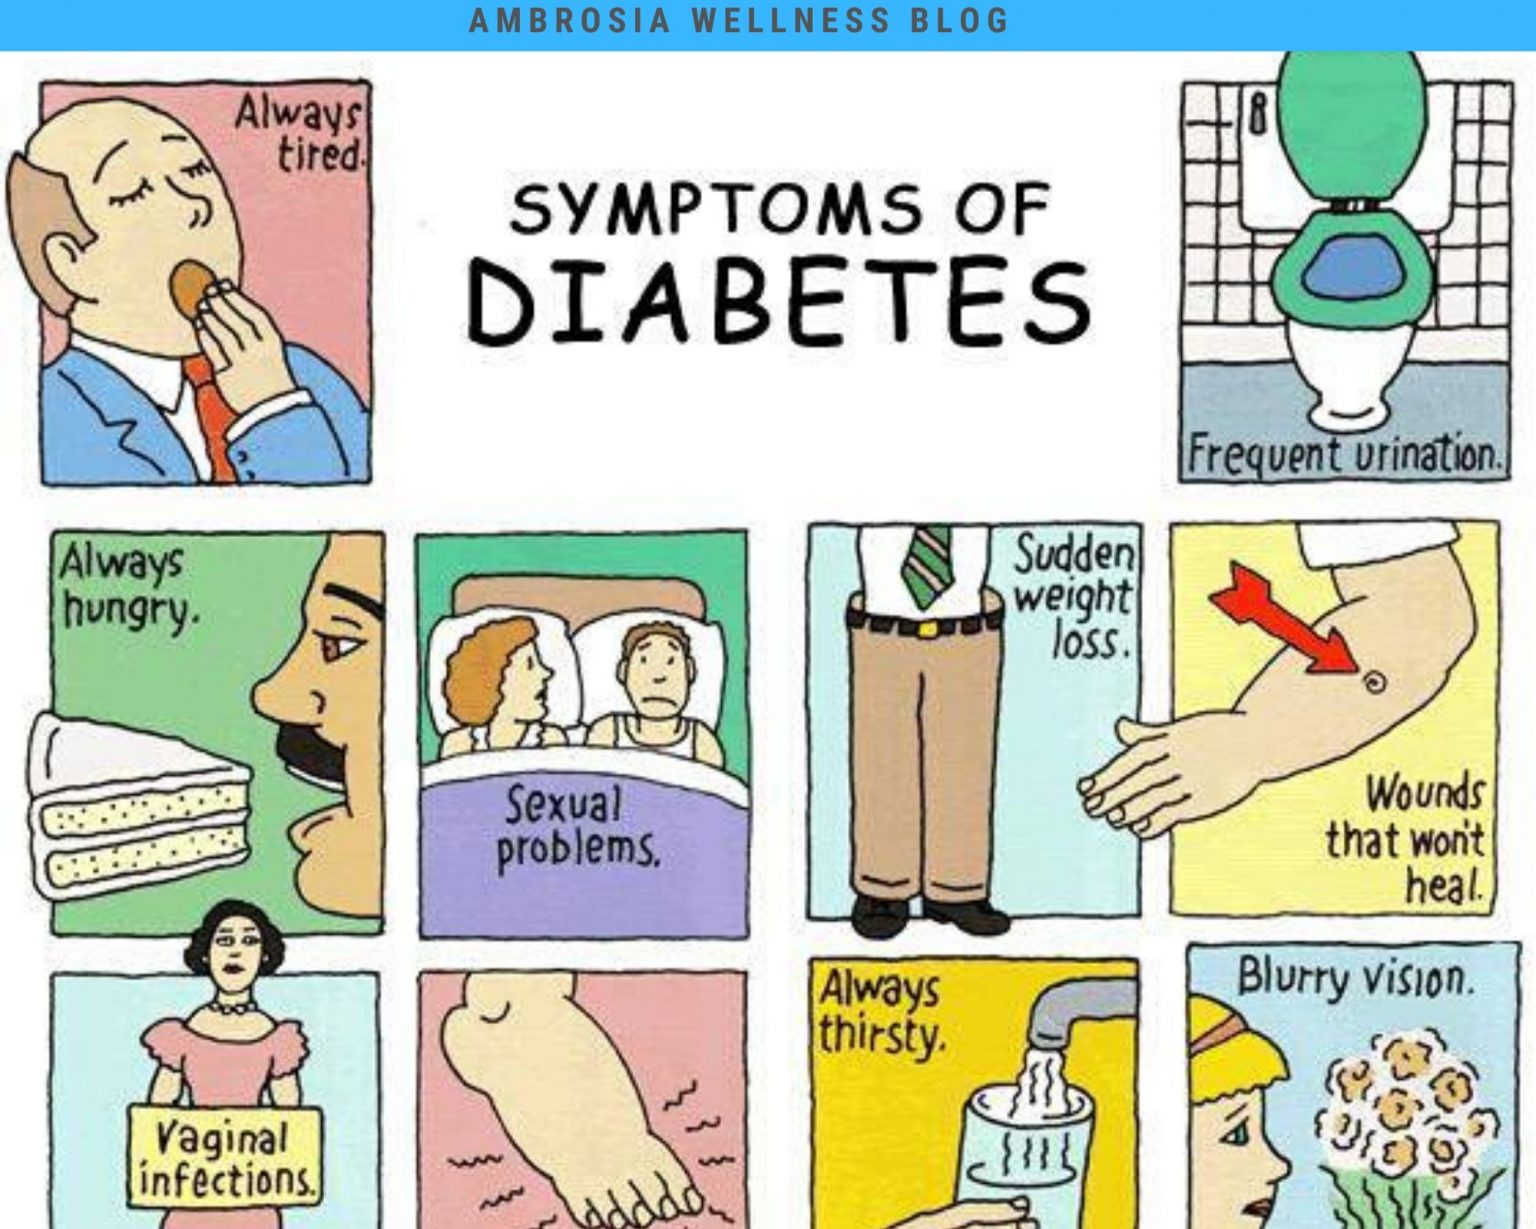 Diabetes Symptoms can lead to high blood glucose and complications